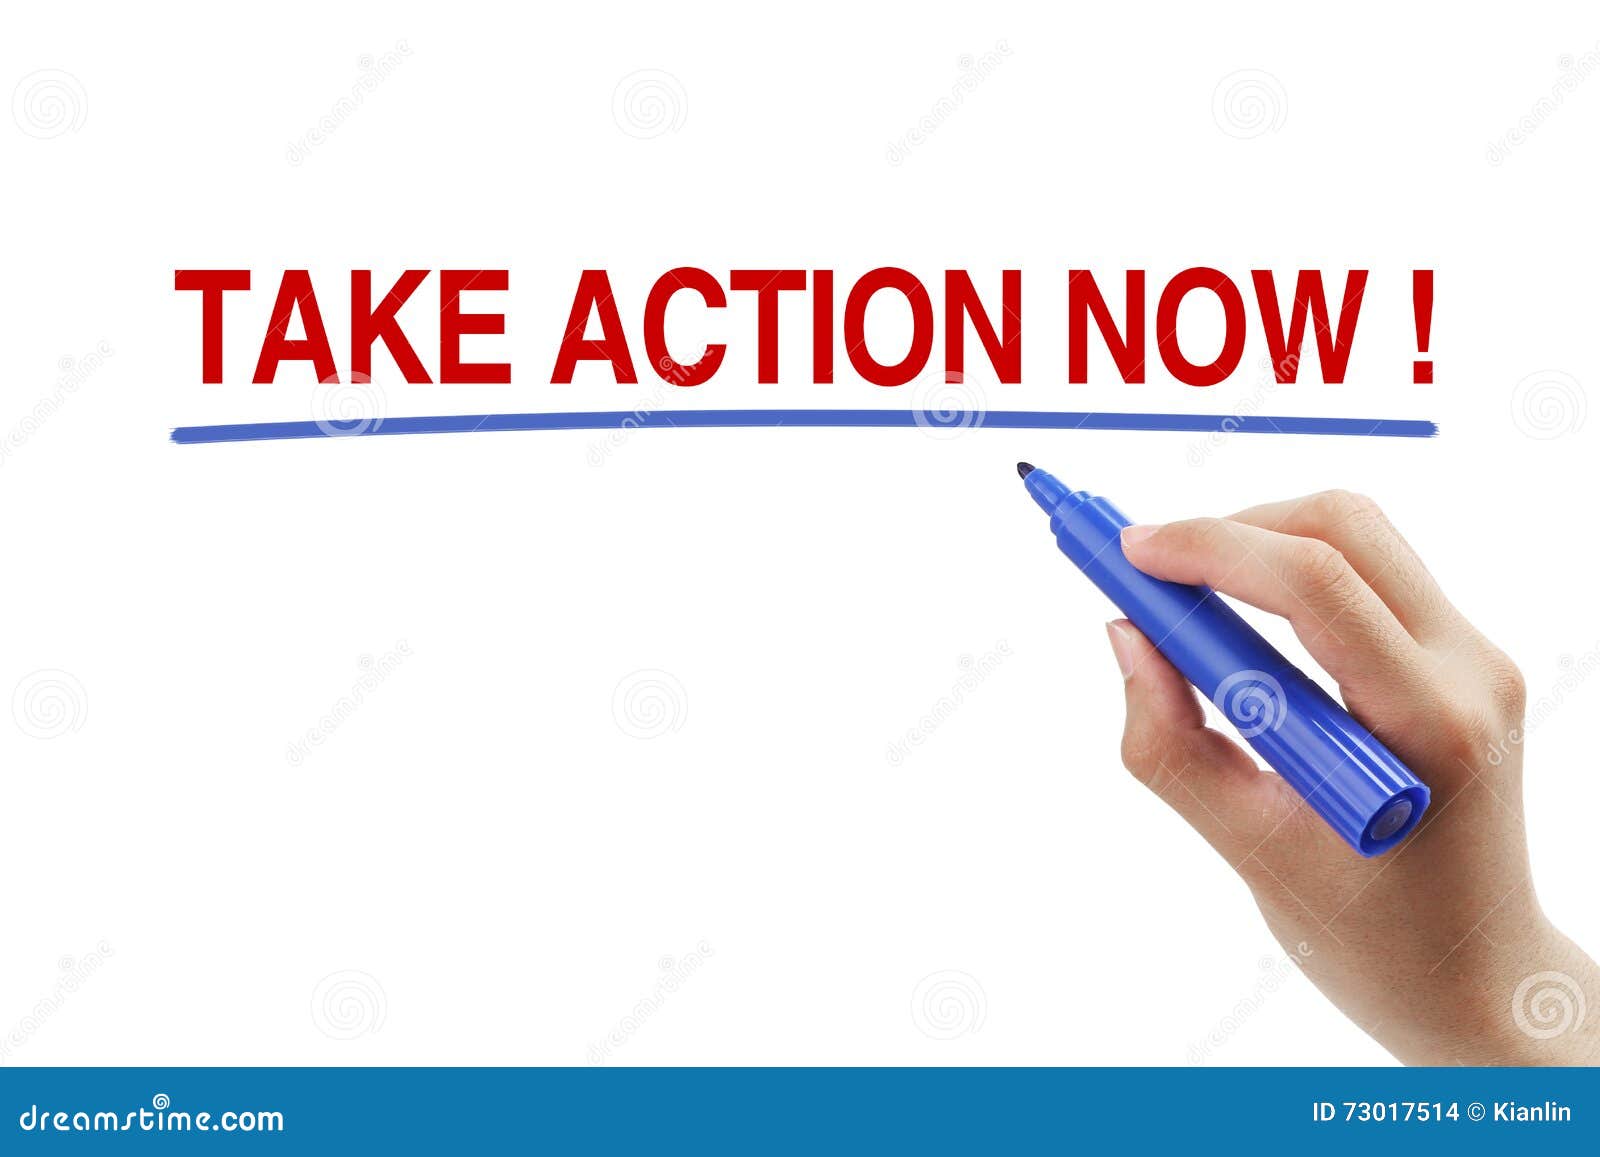 take action now